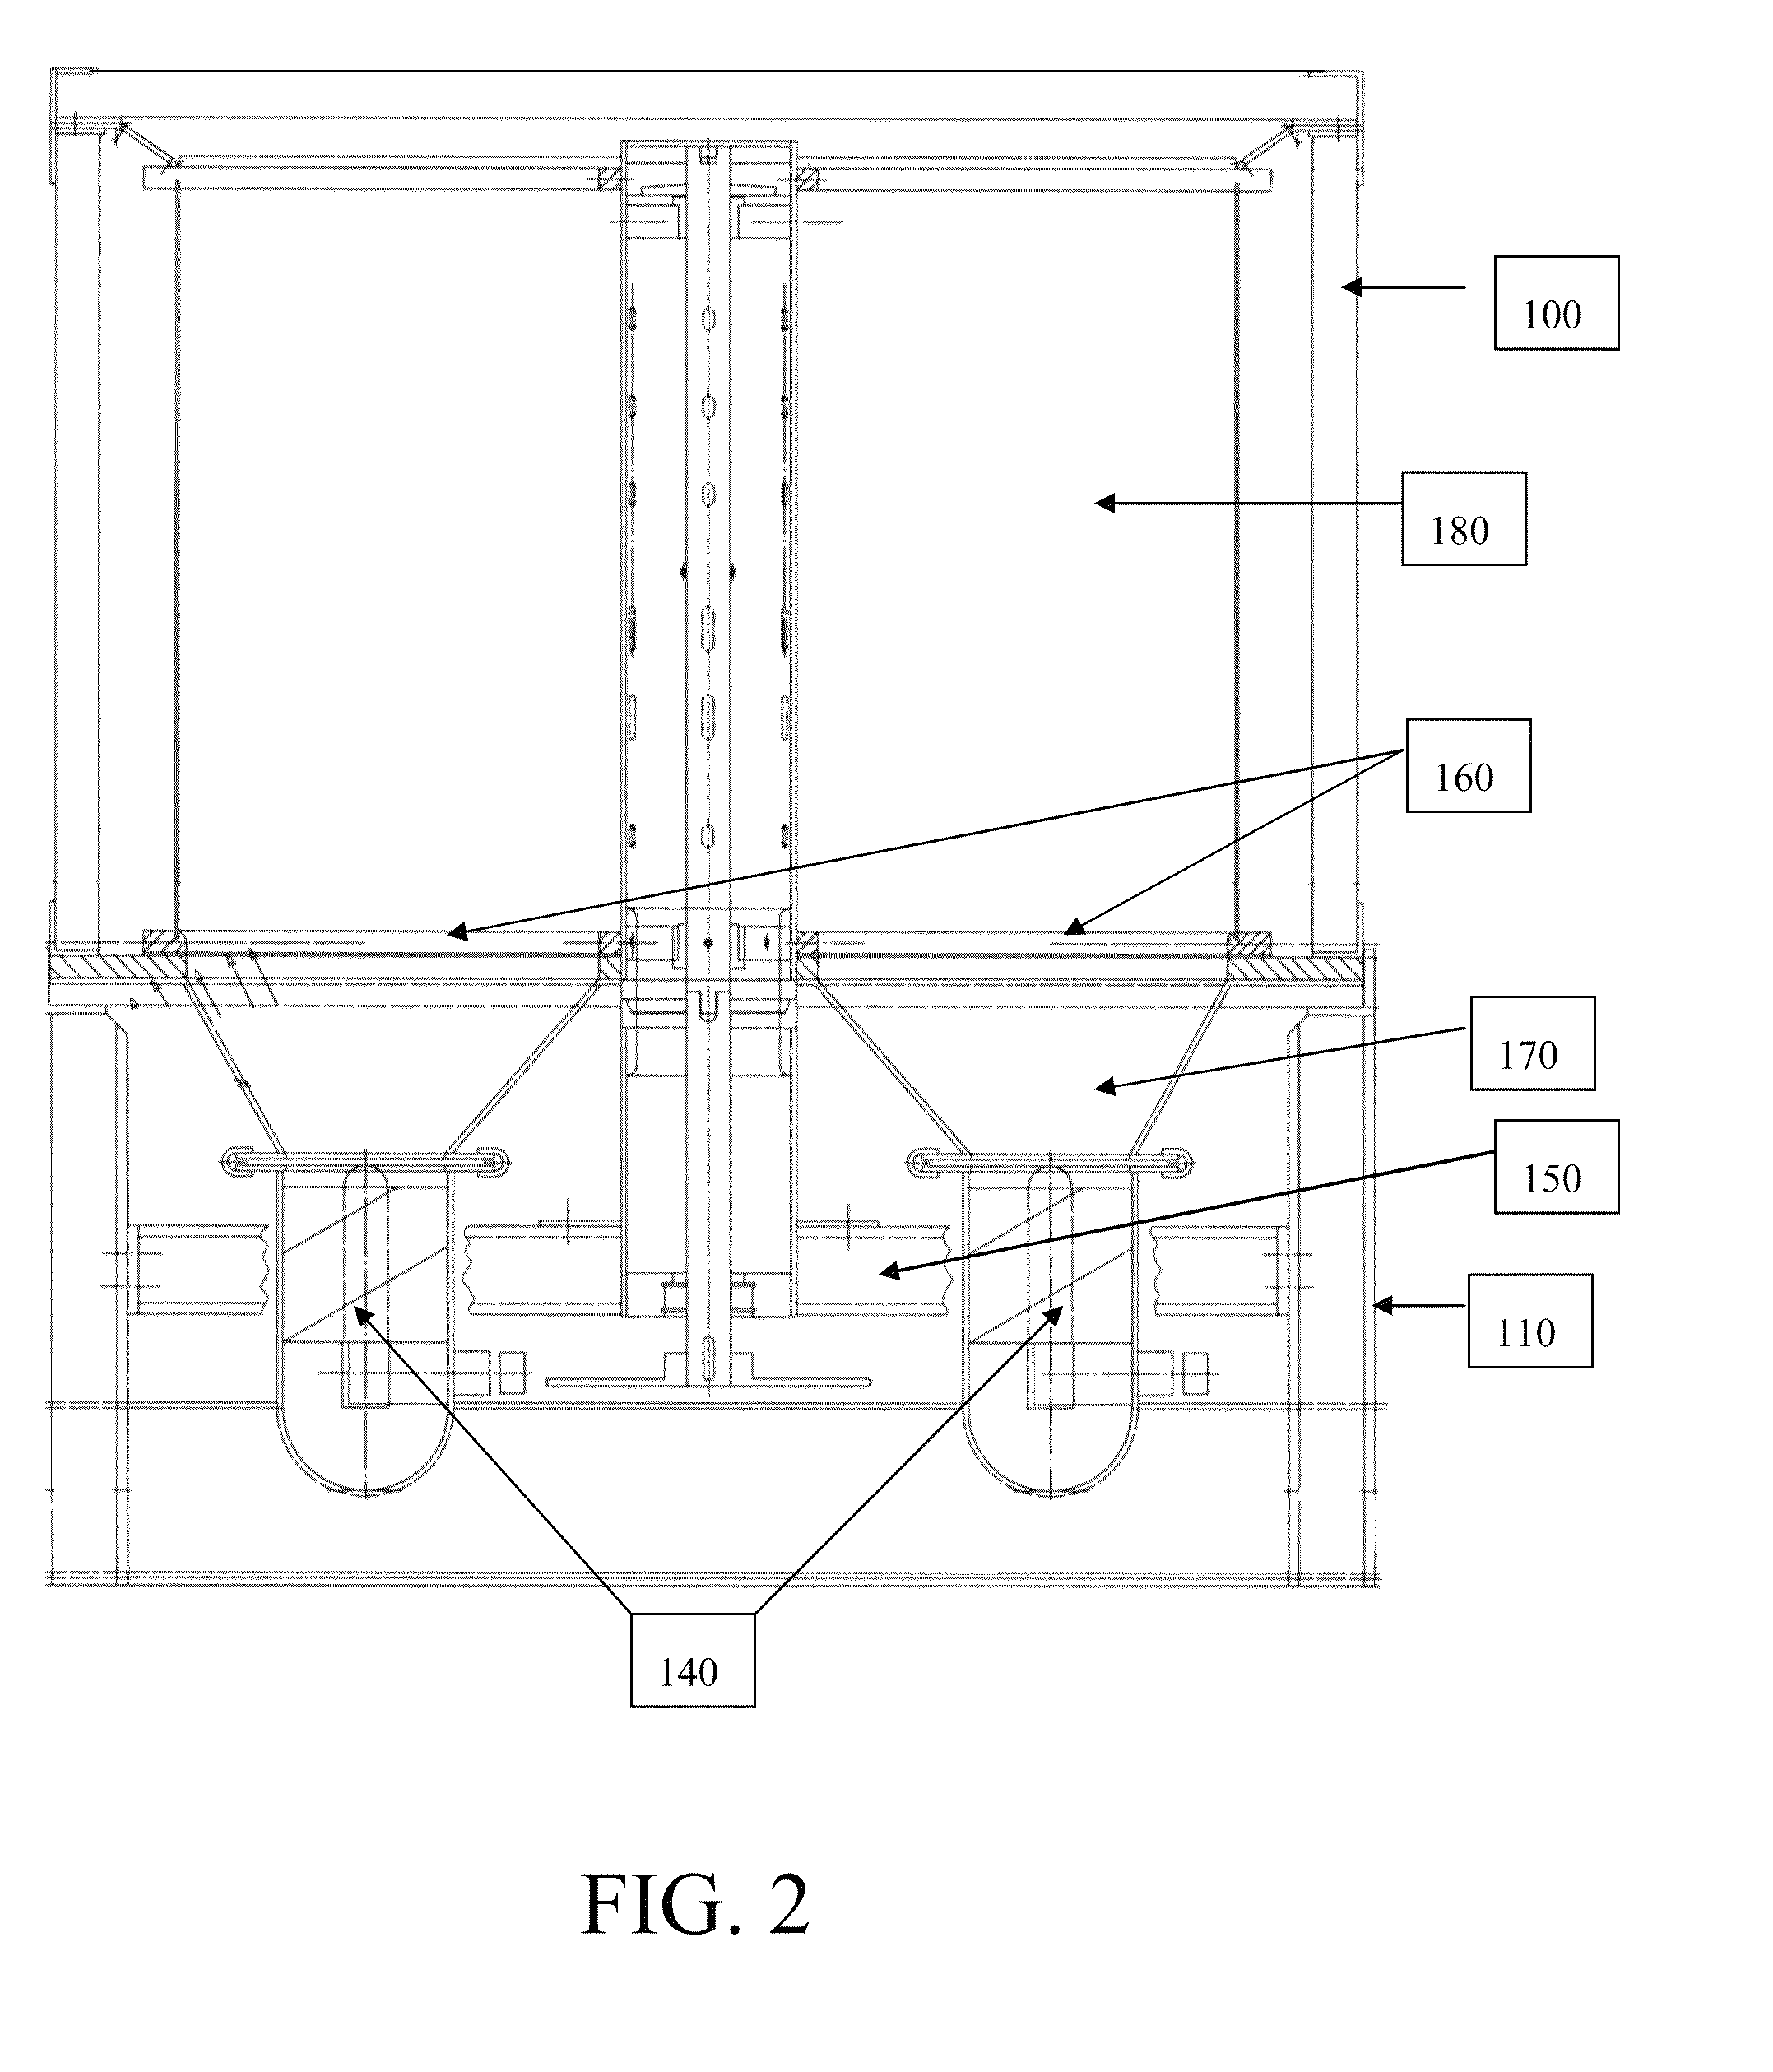 System and method for release and dispersion of flies or other biological control